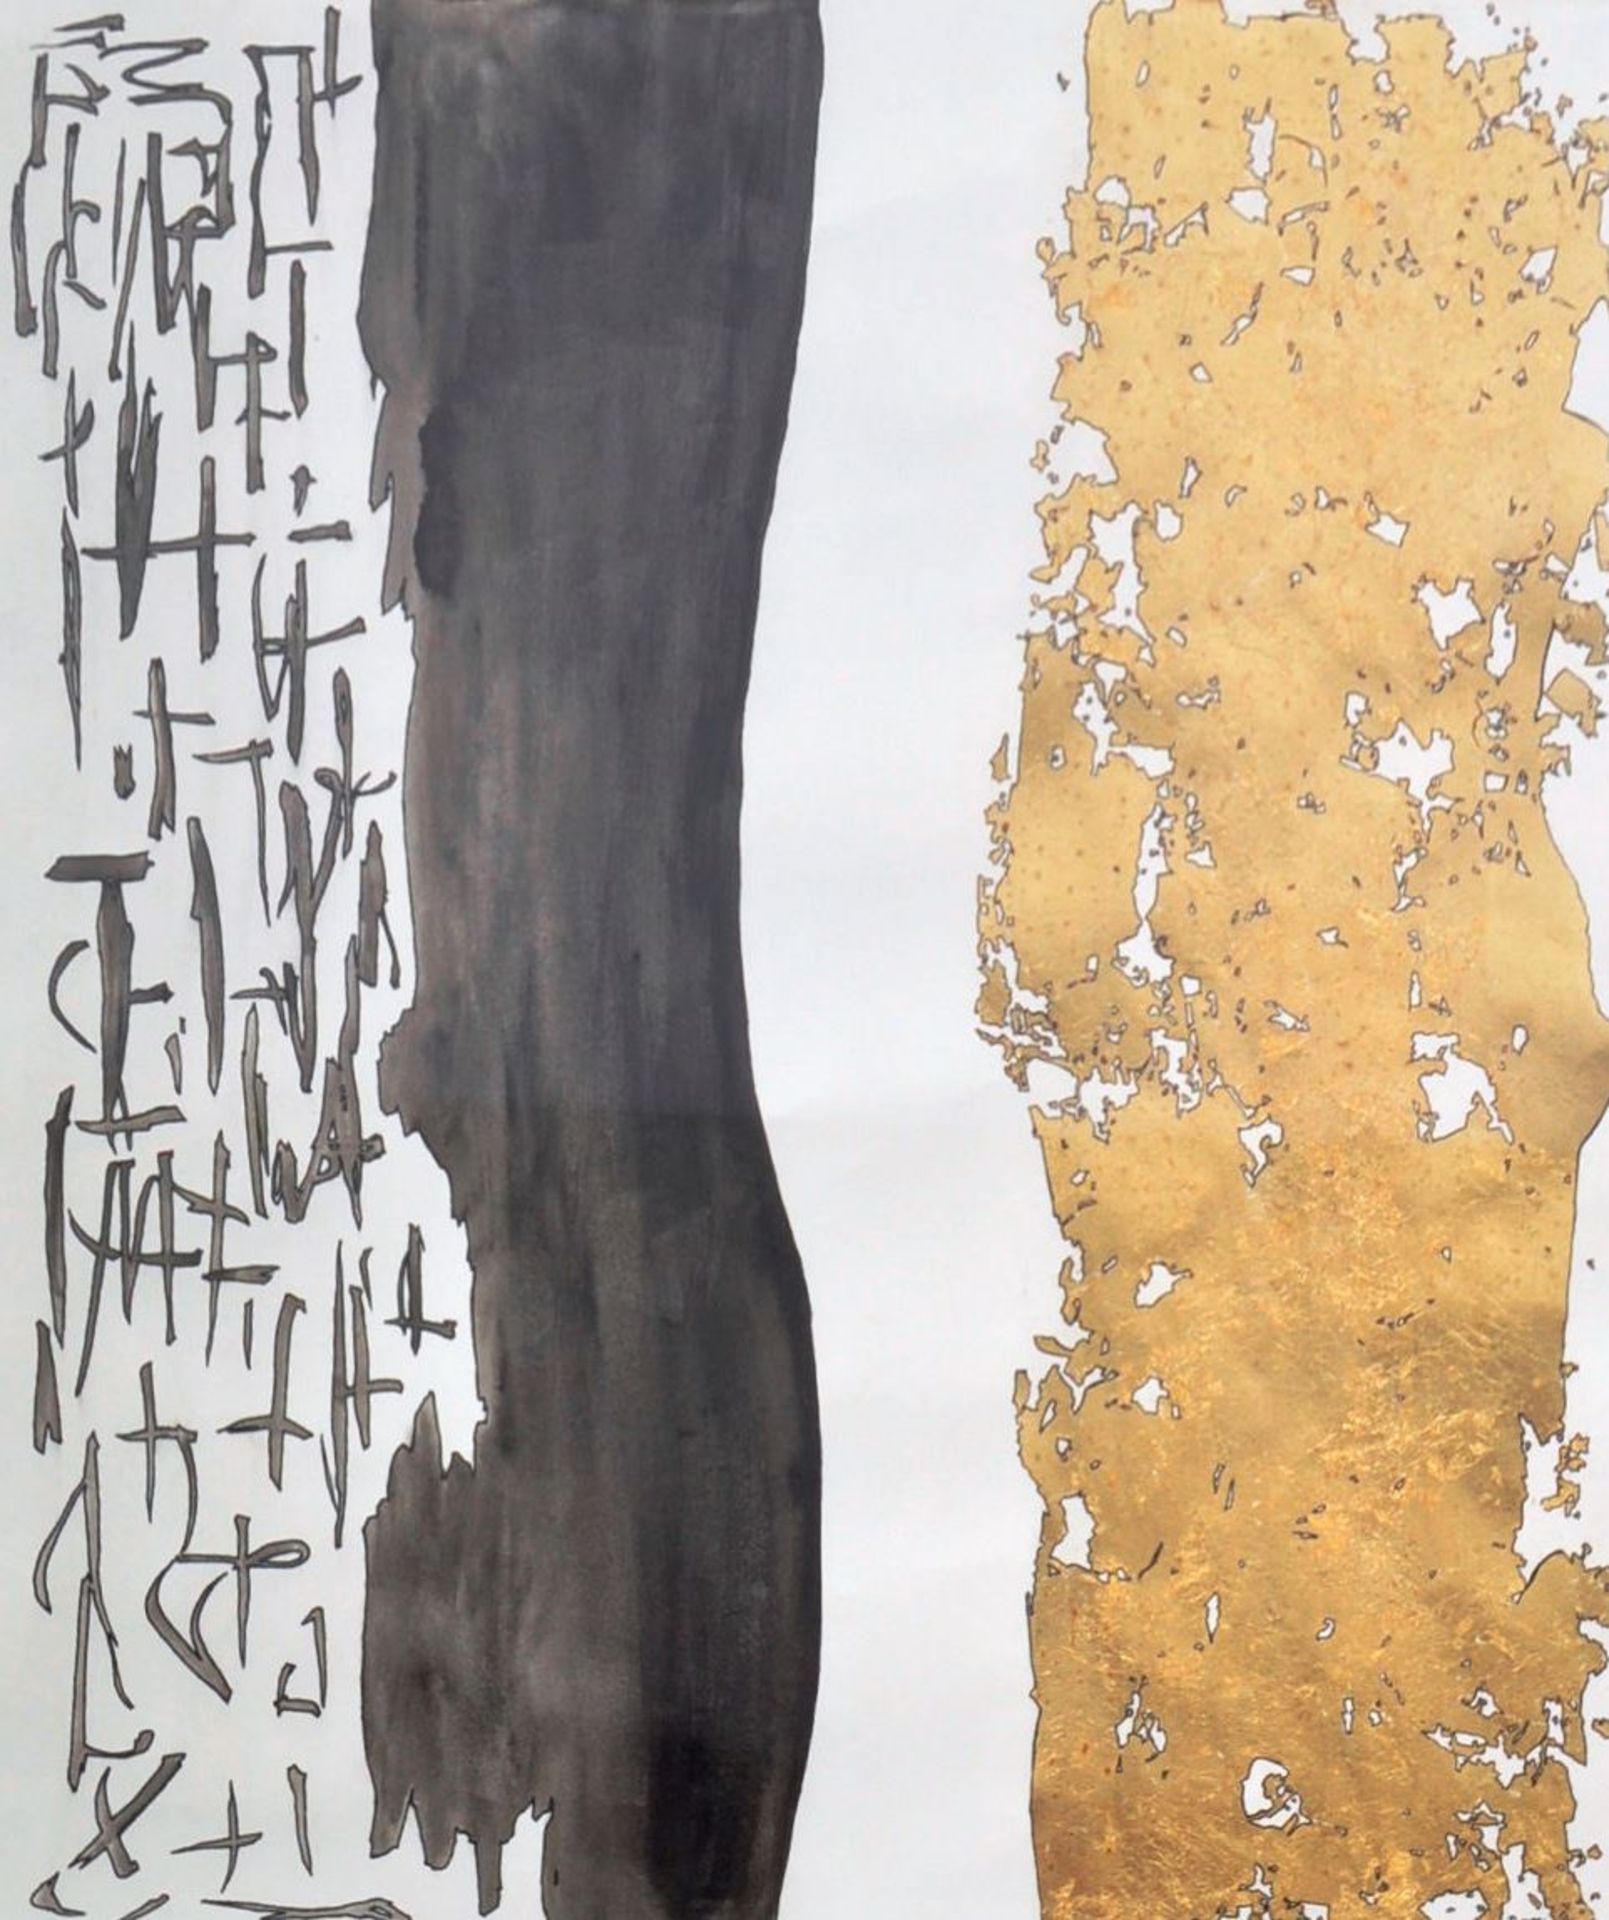 DIMITRA MAZI - "THE MAP WITHIN" - WATERCOLOUR, GOLD-LEAF PAINTING - Image 2 of 5